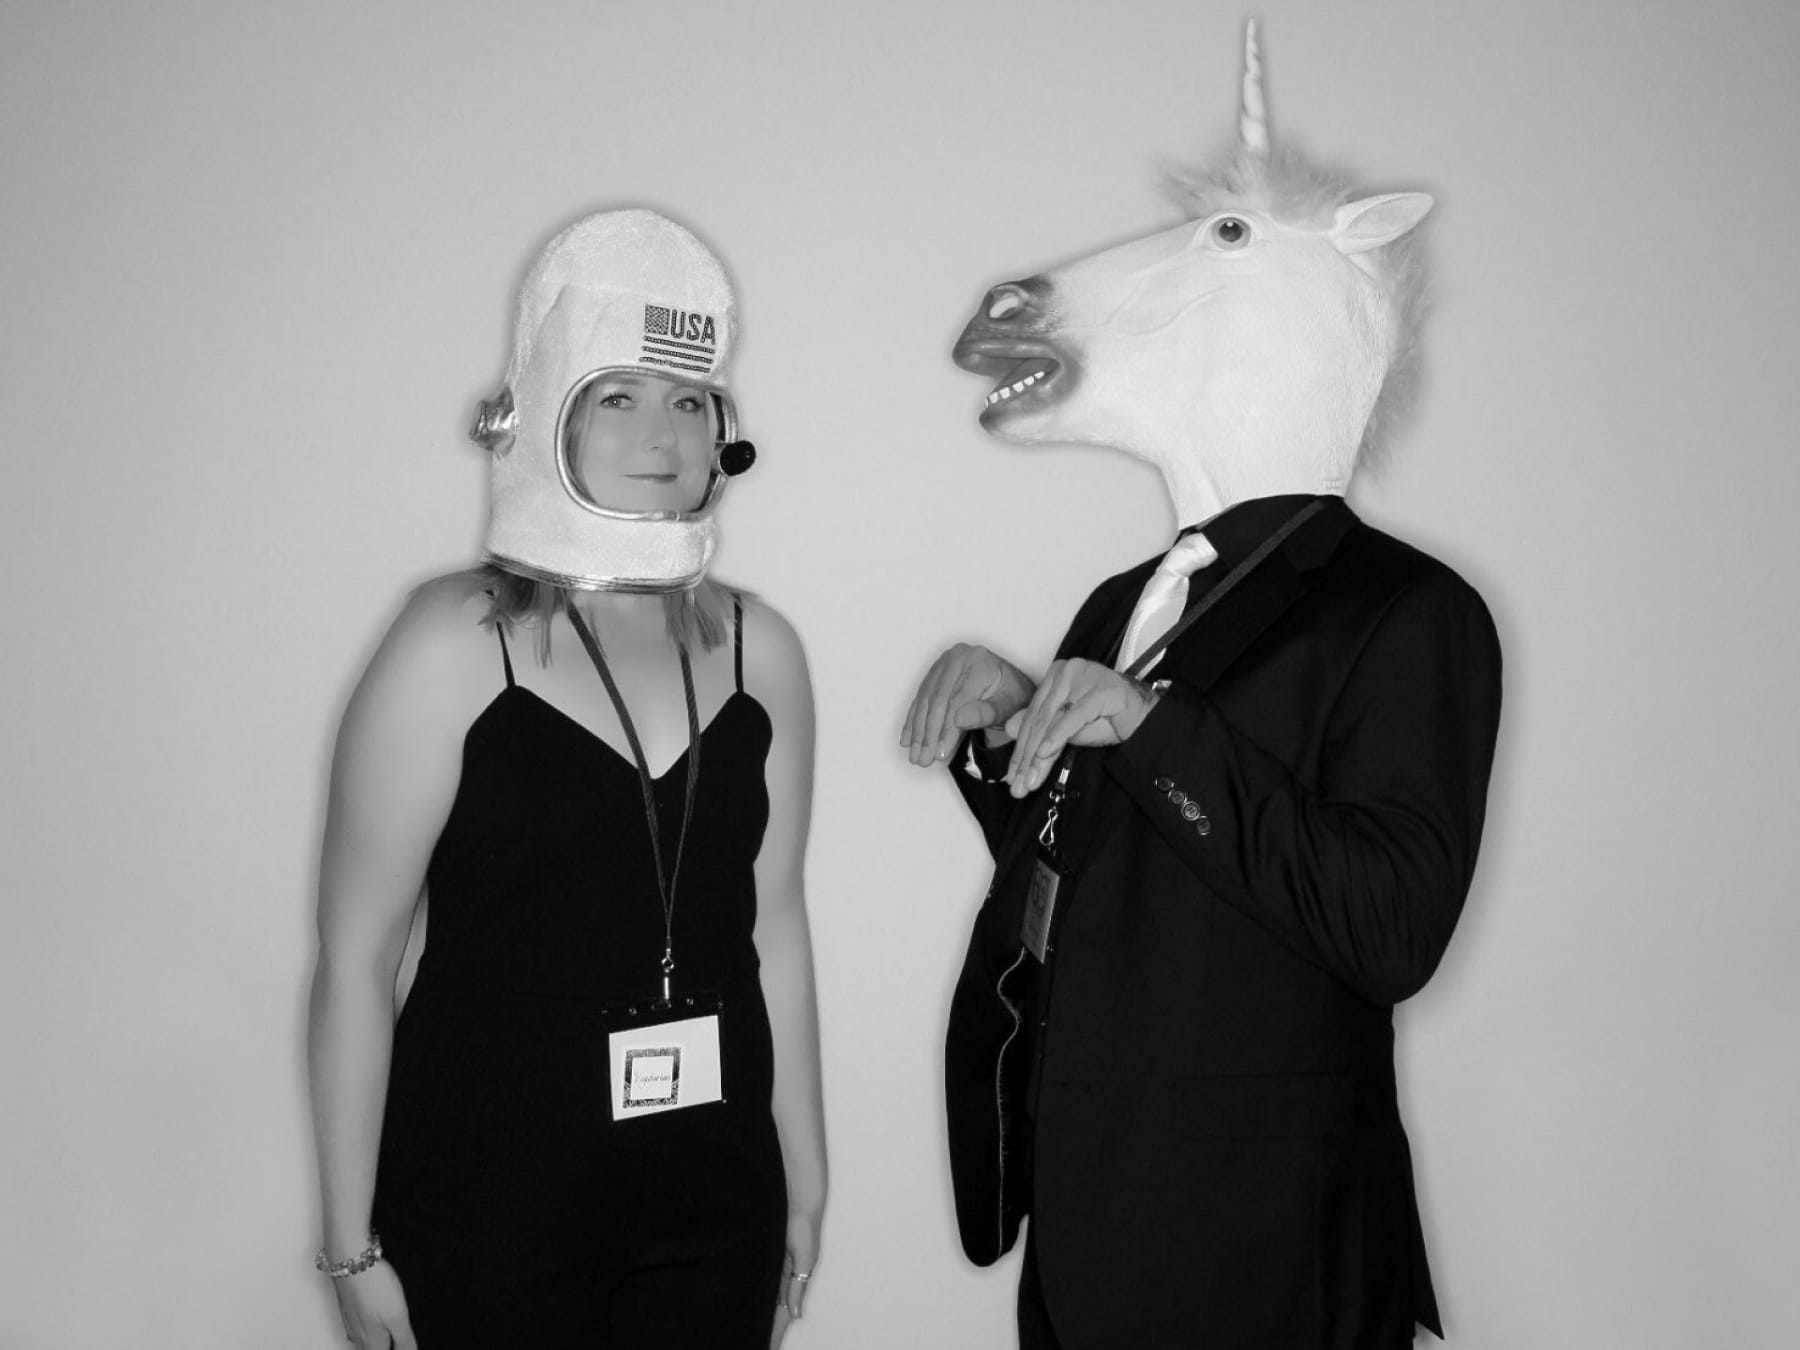 Two Mixte staff wearing silly costumes at photo booth